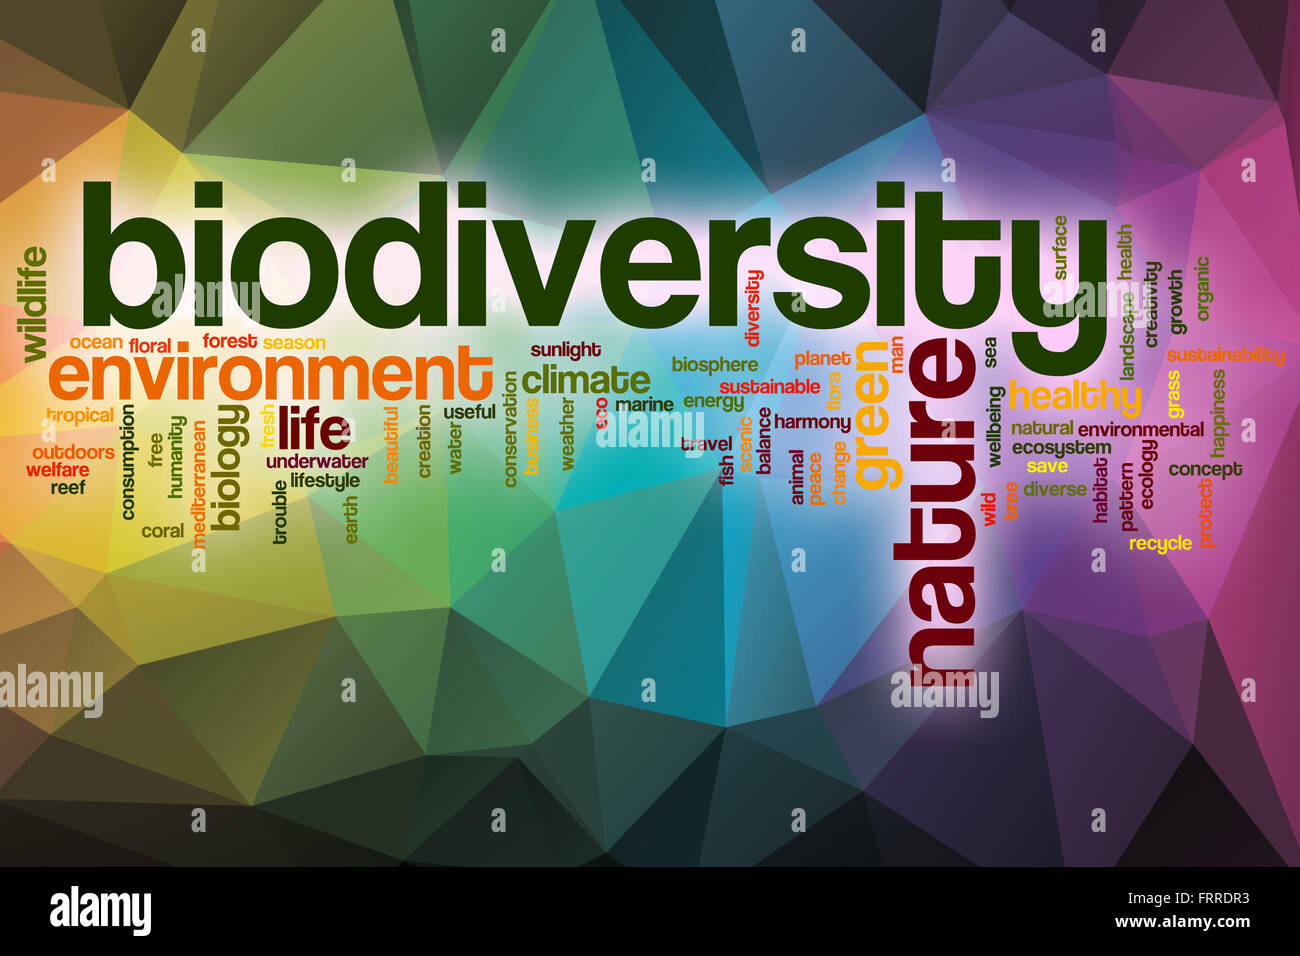 Biodiversity word cloud concept with abstract background Stock Photo